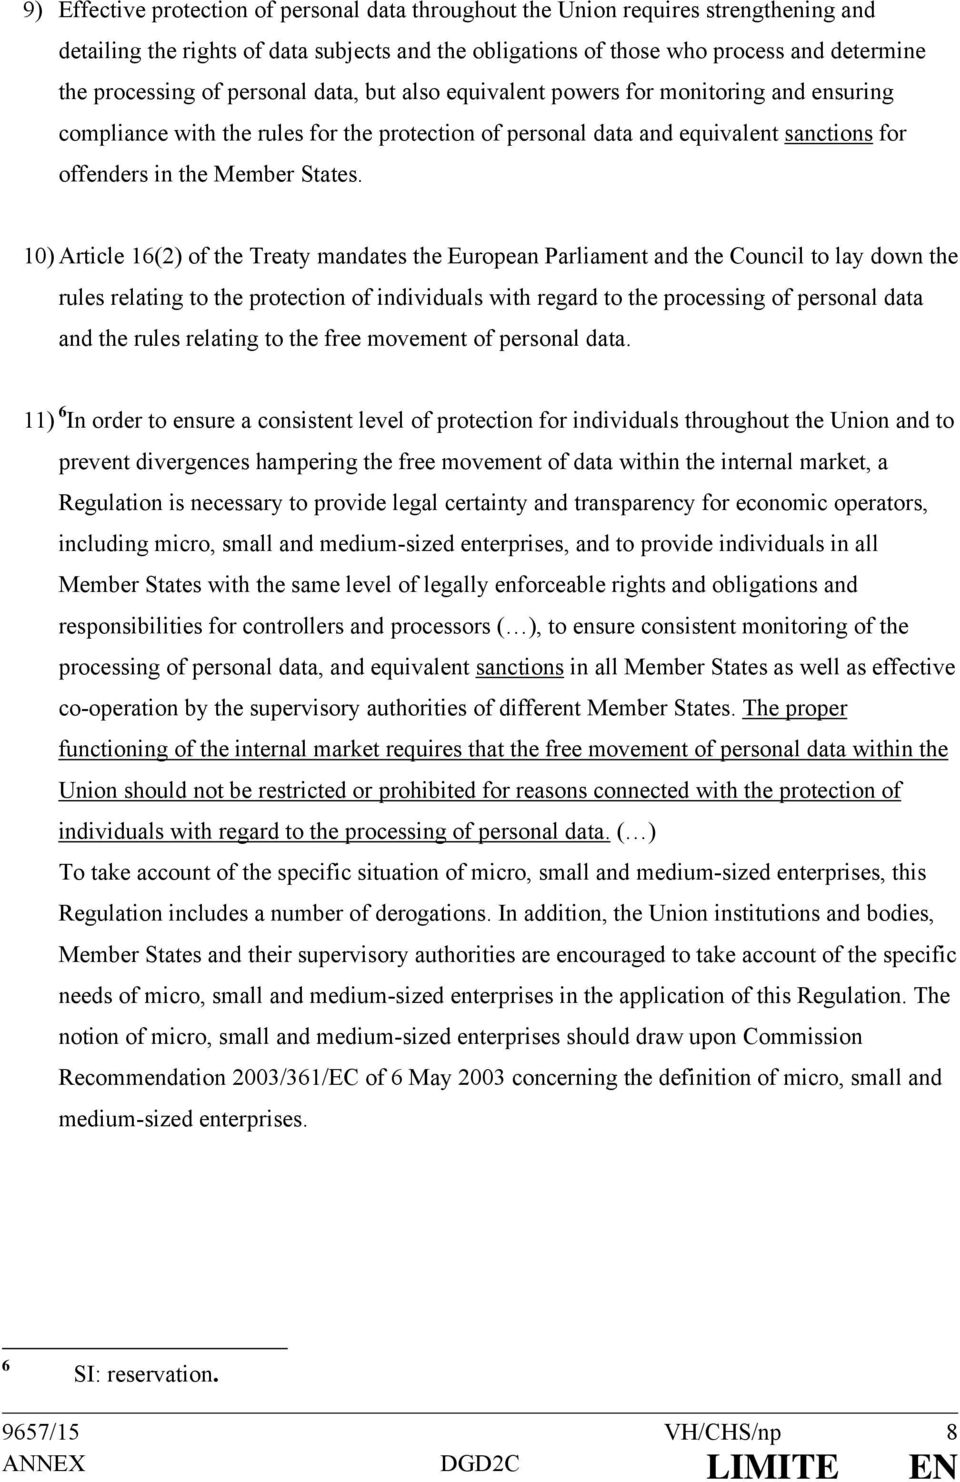 10) Article 16(2) of the Treaty mandates the European Parliament and the Council to lay down the rules relating to the protection of individuals with regard to the processing of personal data and the